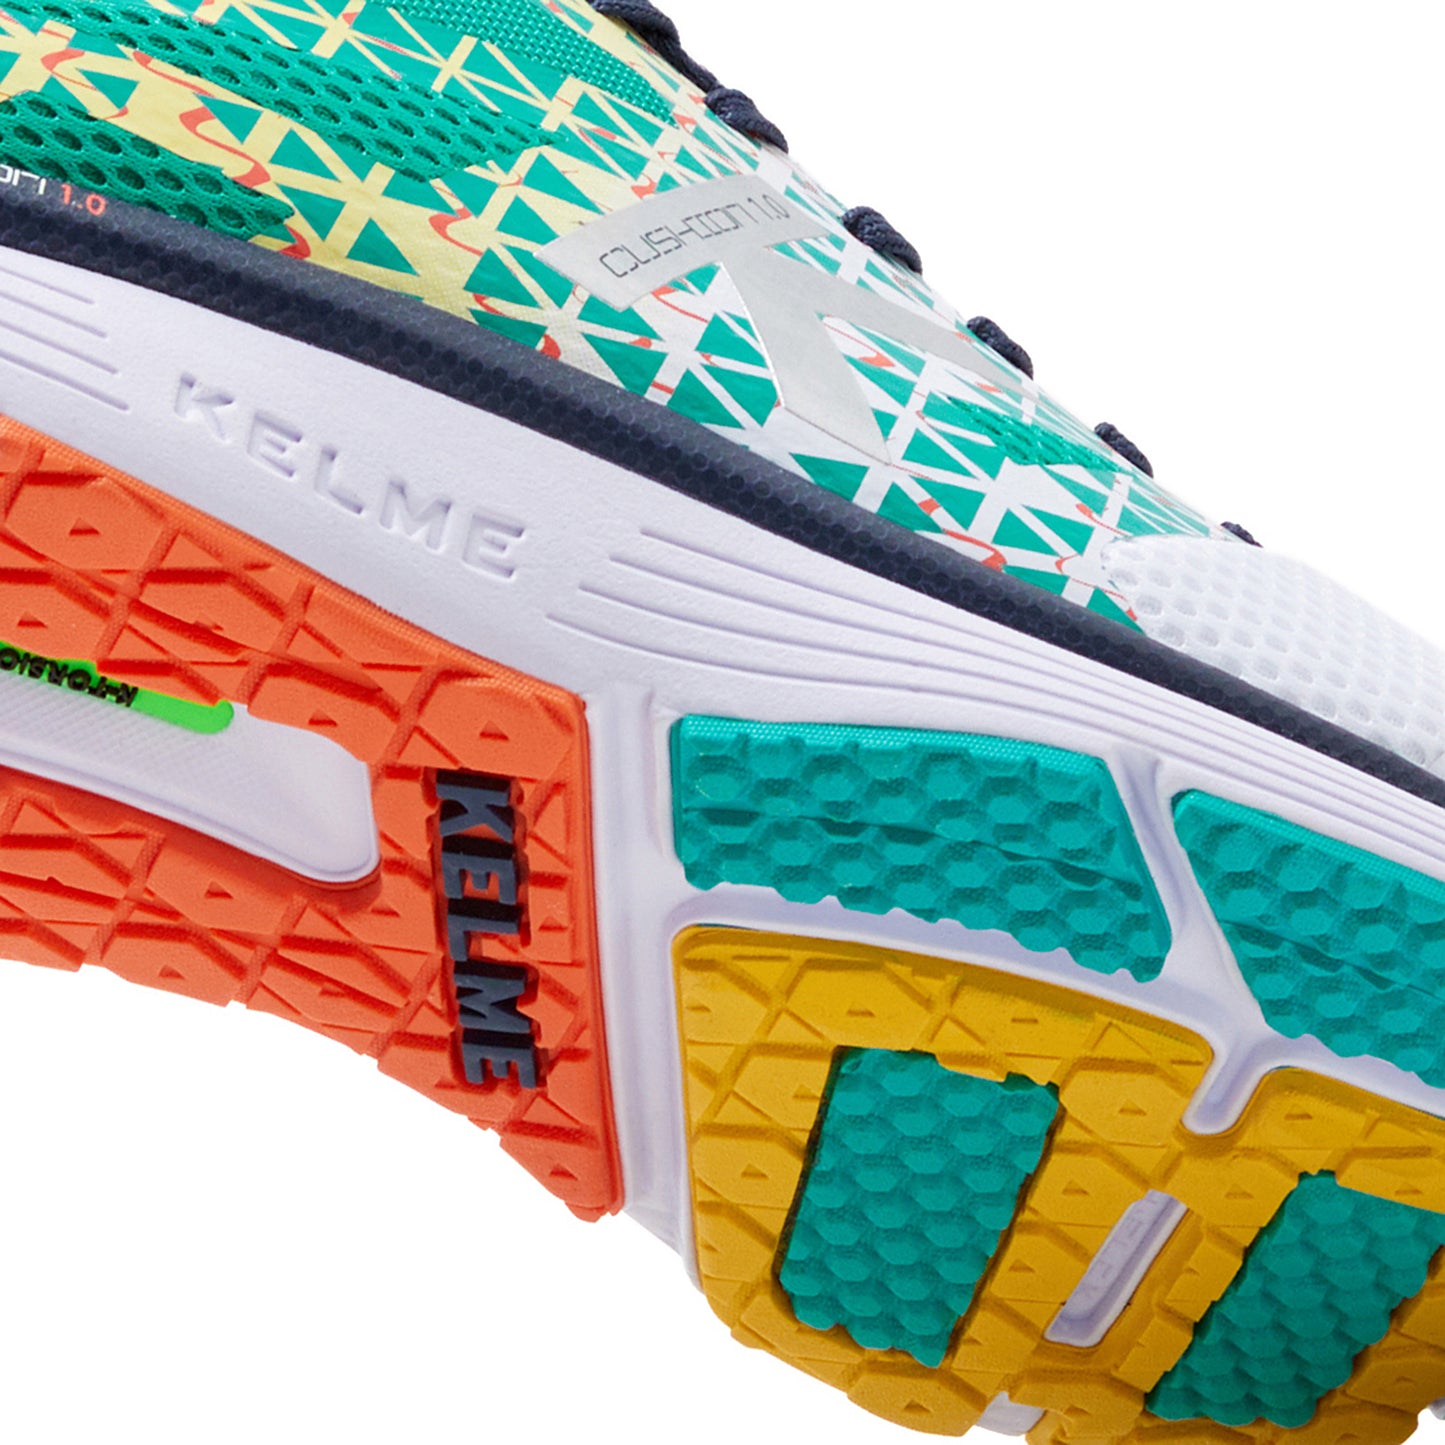 Barcelona Running Shoes- White/Turquoise